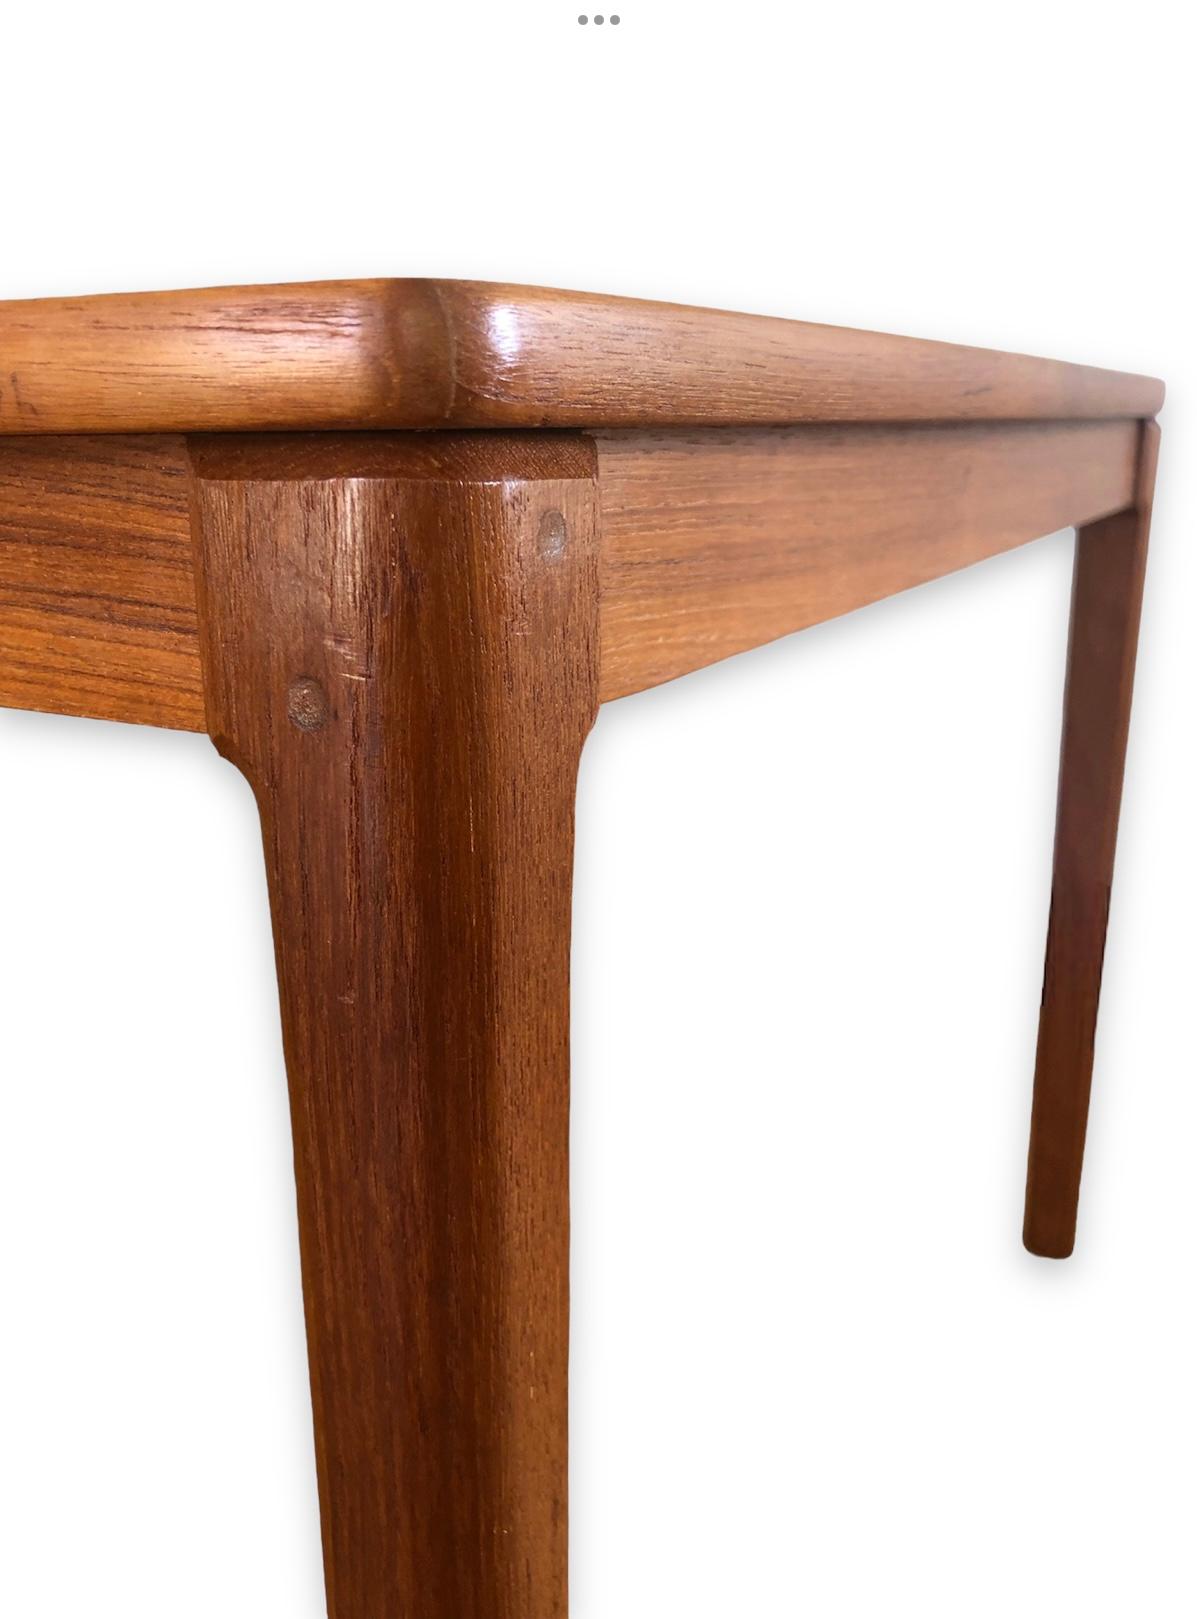 Mid Century Teak Wood Side Table in by Albert Larsson, 1968 For Sale 4